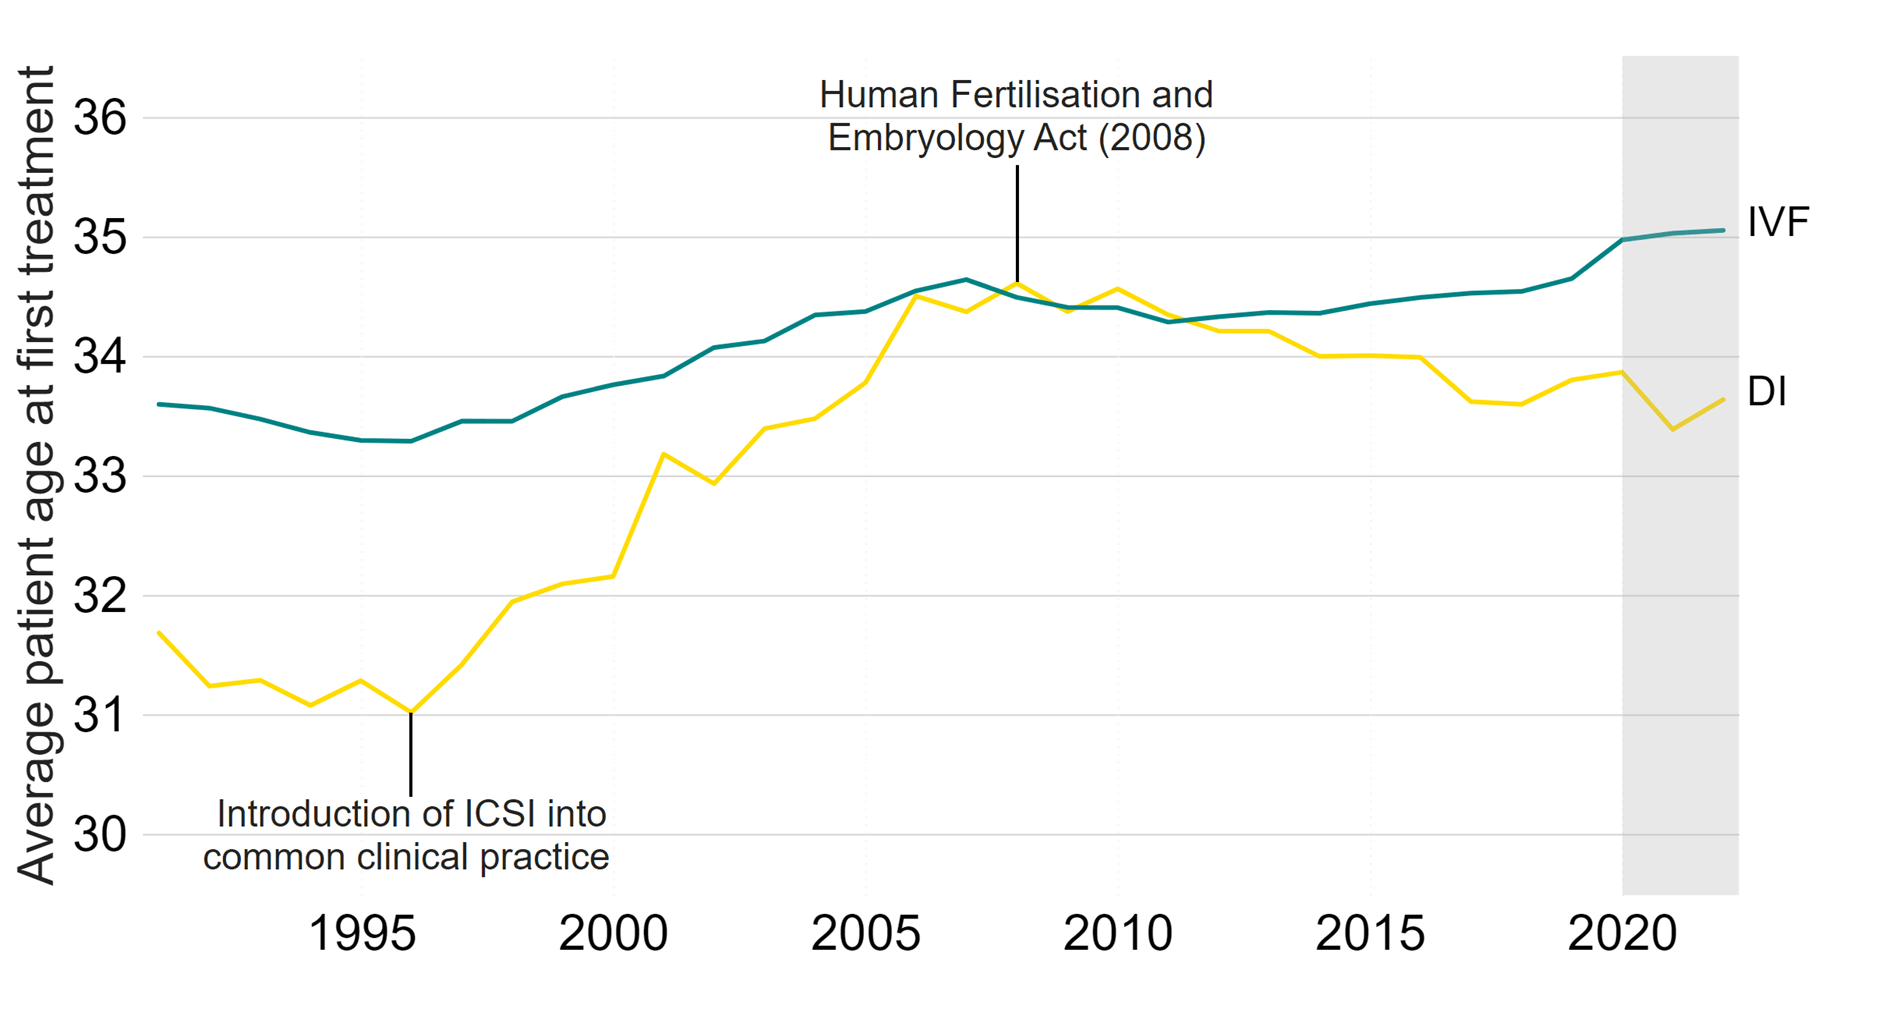 Line graph showing increase in average patient age at first IVF cycle since the 1990s, while age at first DI cycle decreased since around 2008.